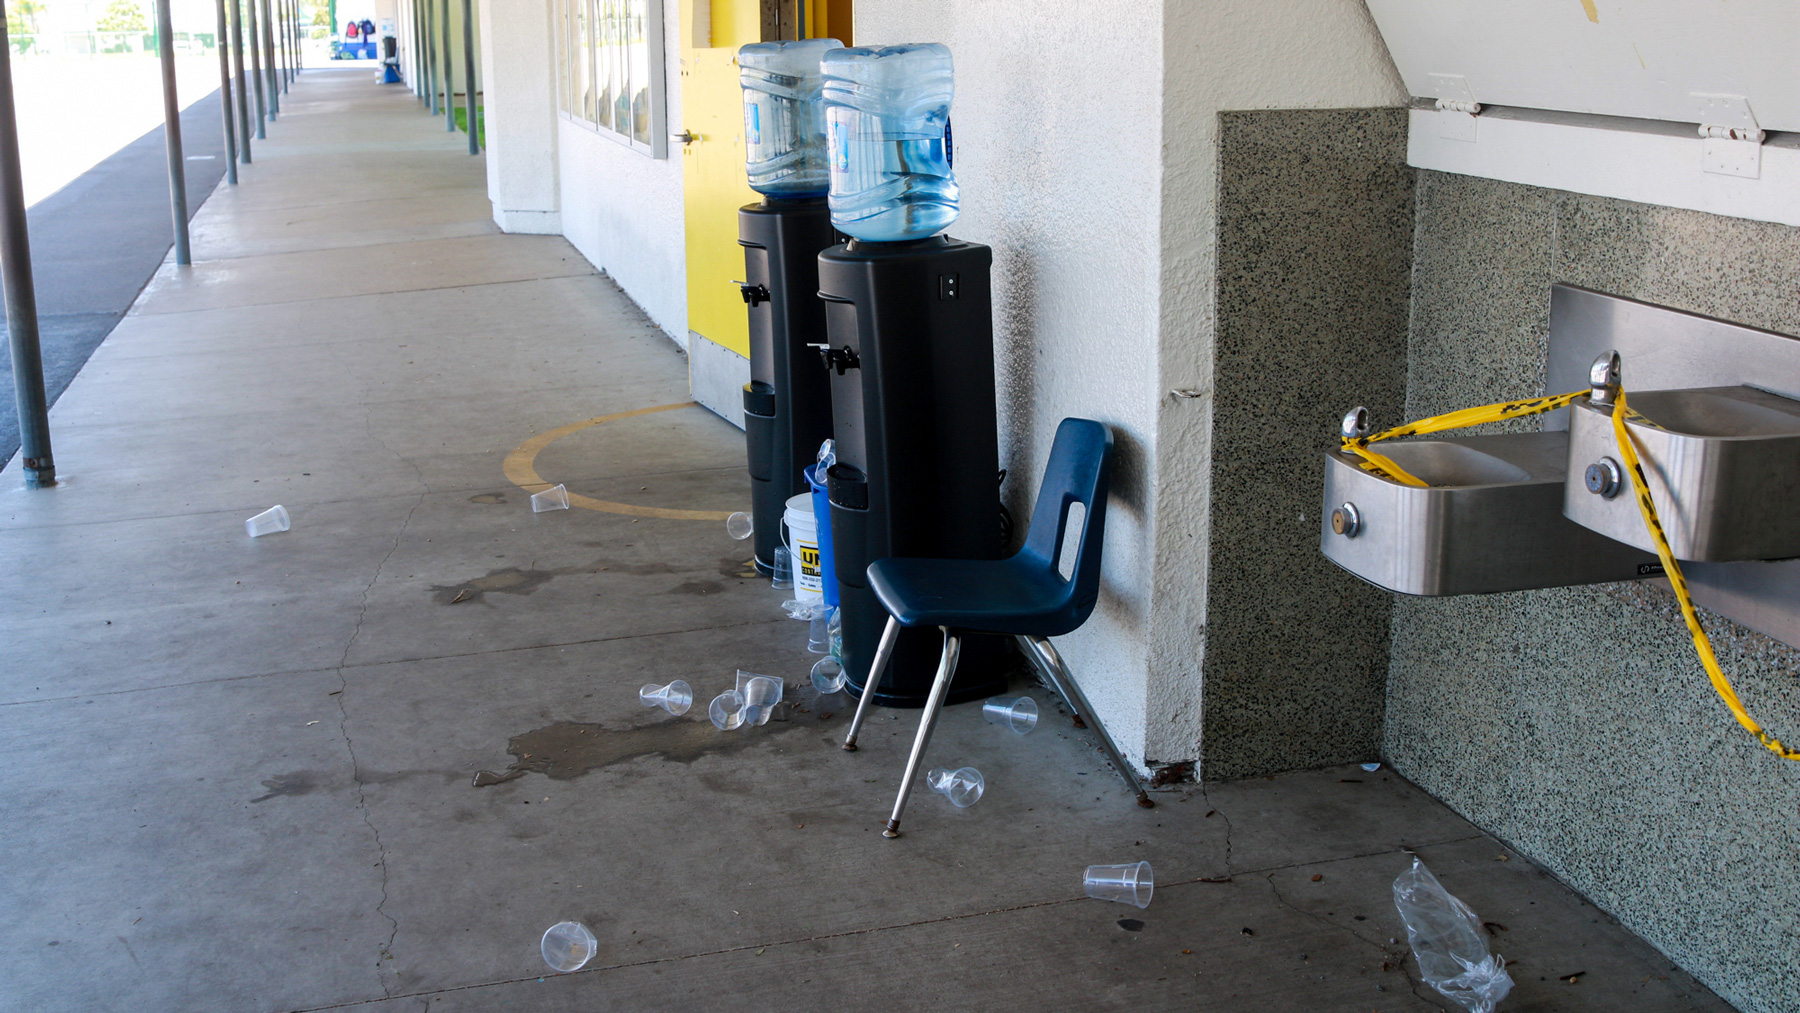 School officials provided water cooler stations at Alice Birney Elementary School in San Diego after its water system tested positive for lead. (Elissa Nuñez/News21)